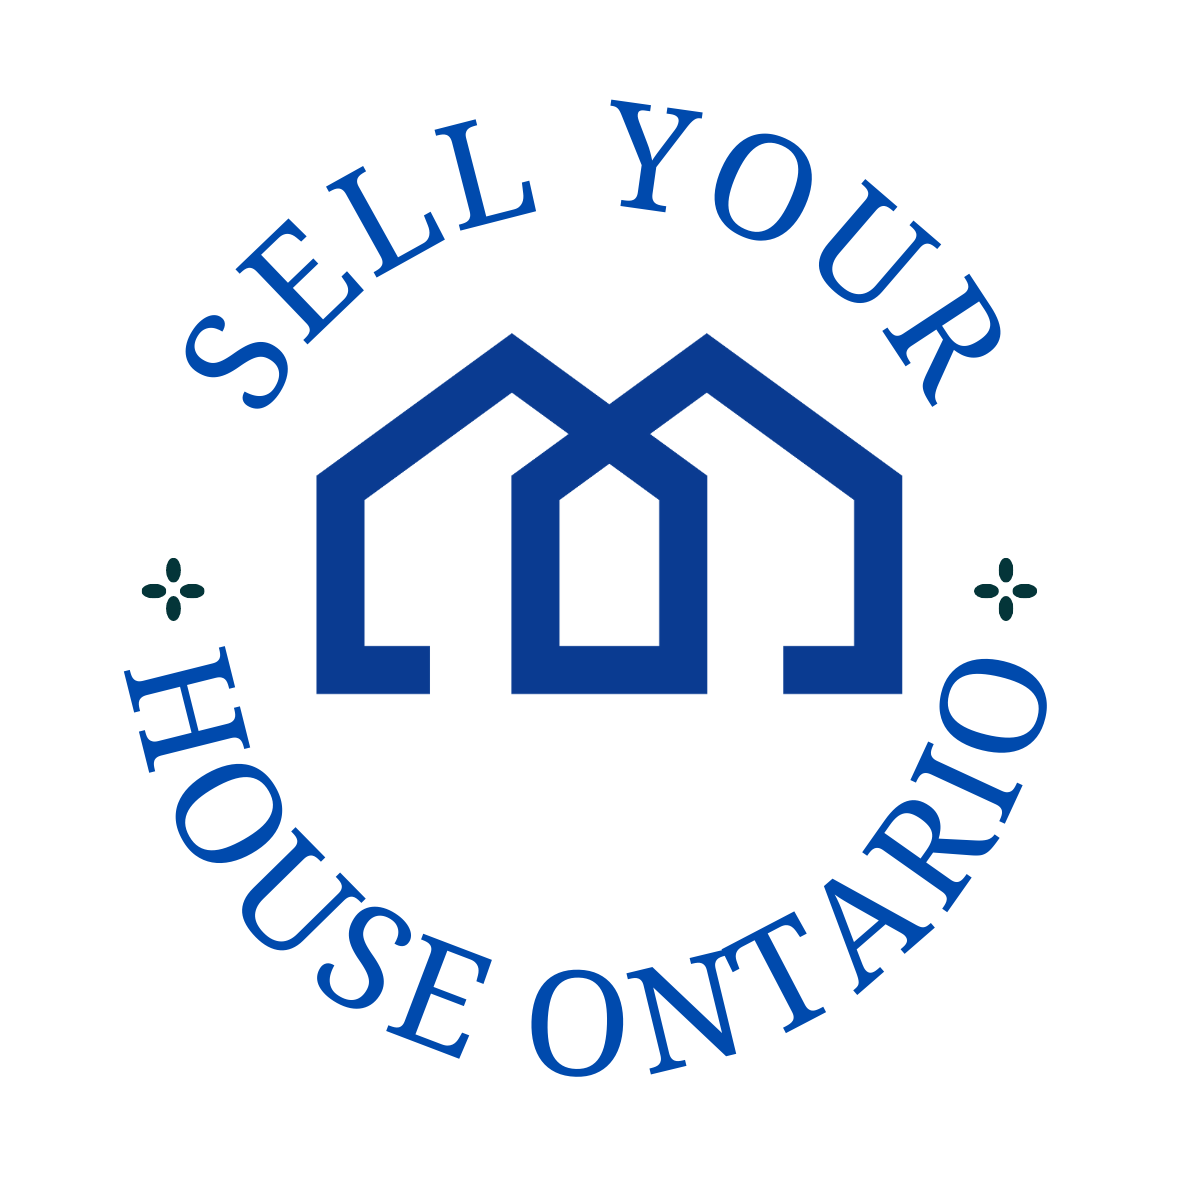 Sell Your House Ontario logo